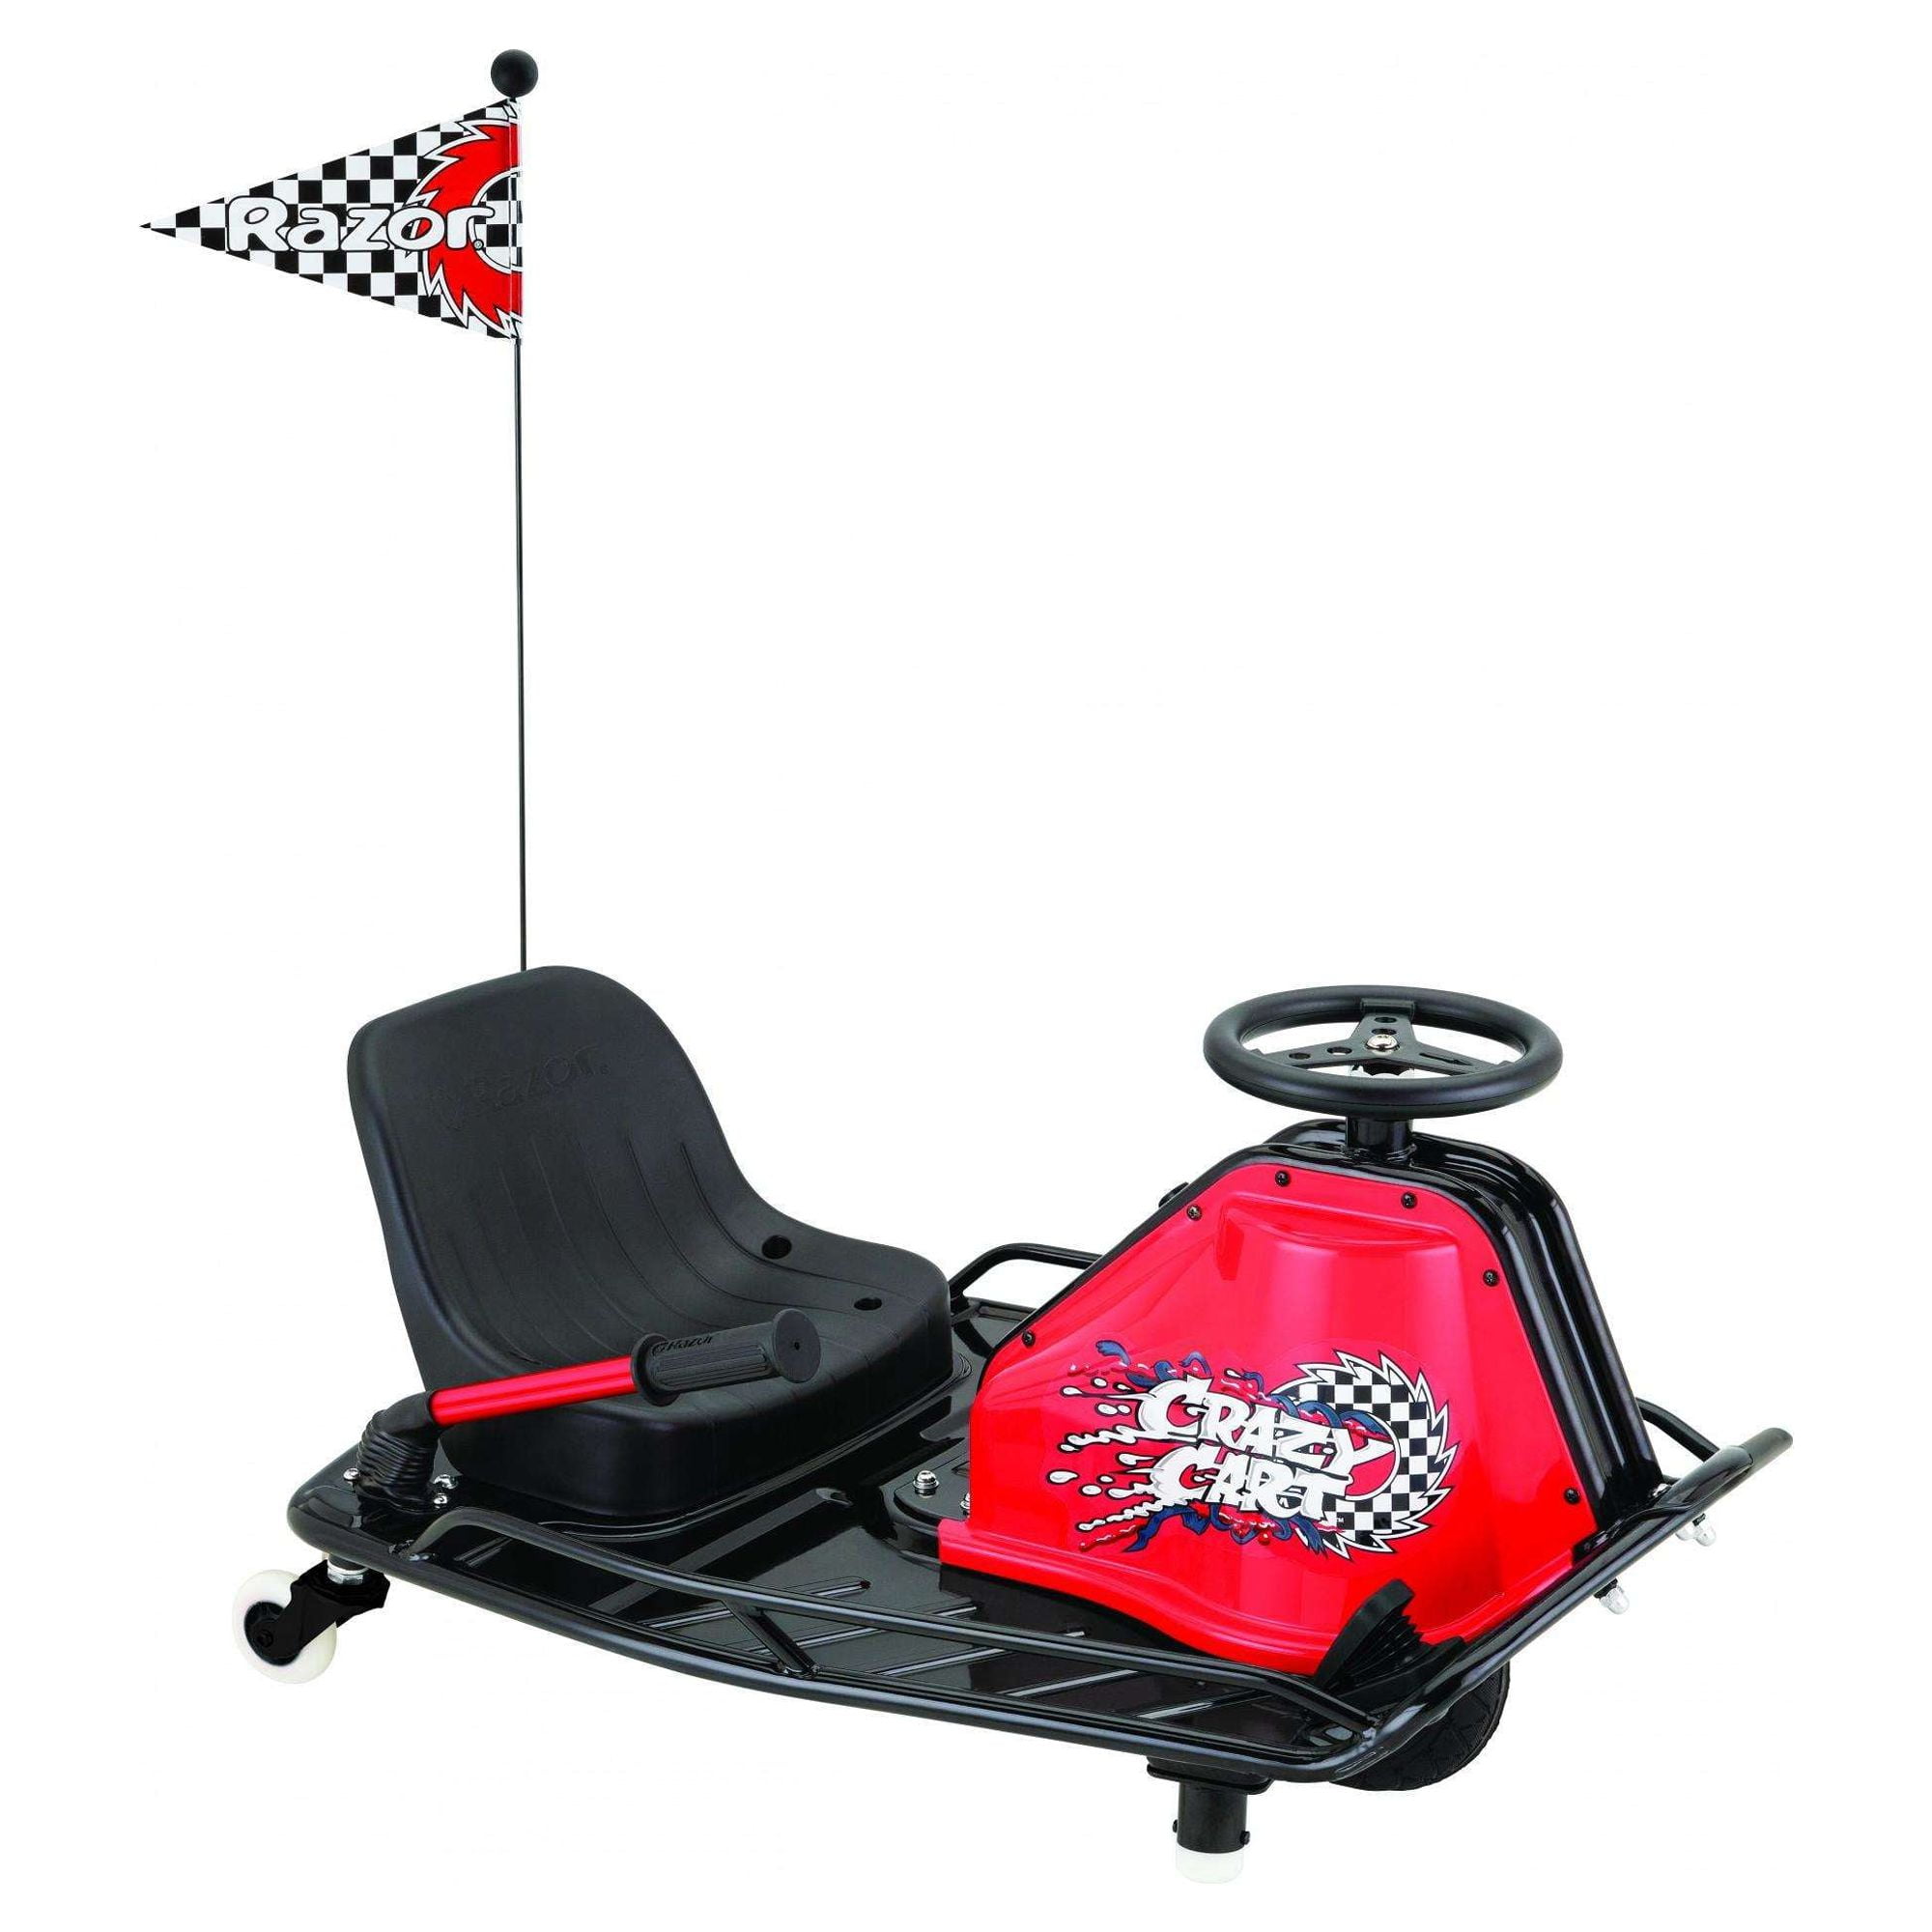  Razor Crazy Cart - 24V Electric Drifting Go Kart - Variable  Speed, Up to 12 mph, Drift Bar for Controlled Drifts, One Size, Black/Red :  Sports & Outdoors